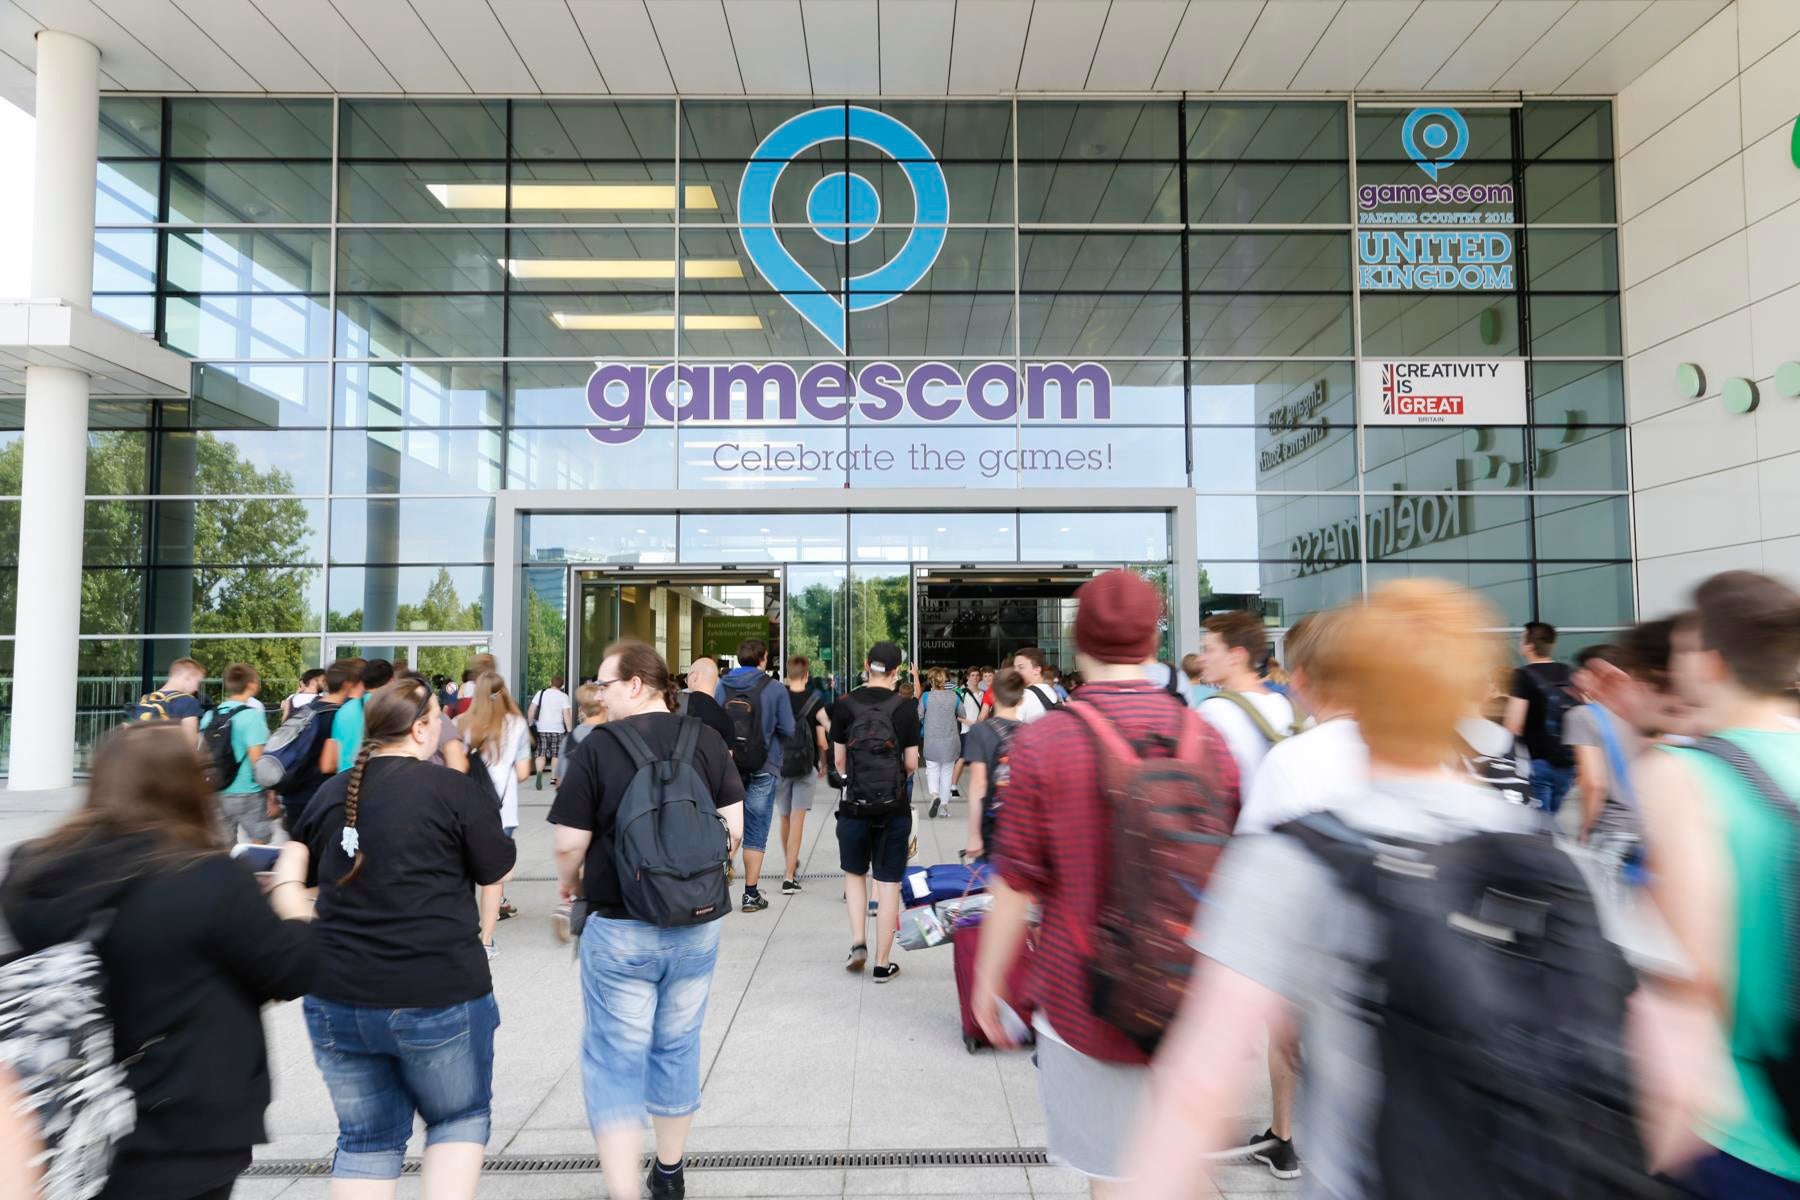 Image for 345,000 attended gamescom 2015, Star Wars Battlefront named game of the show